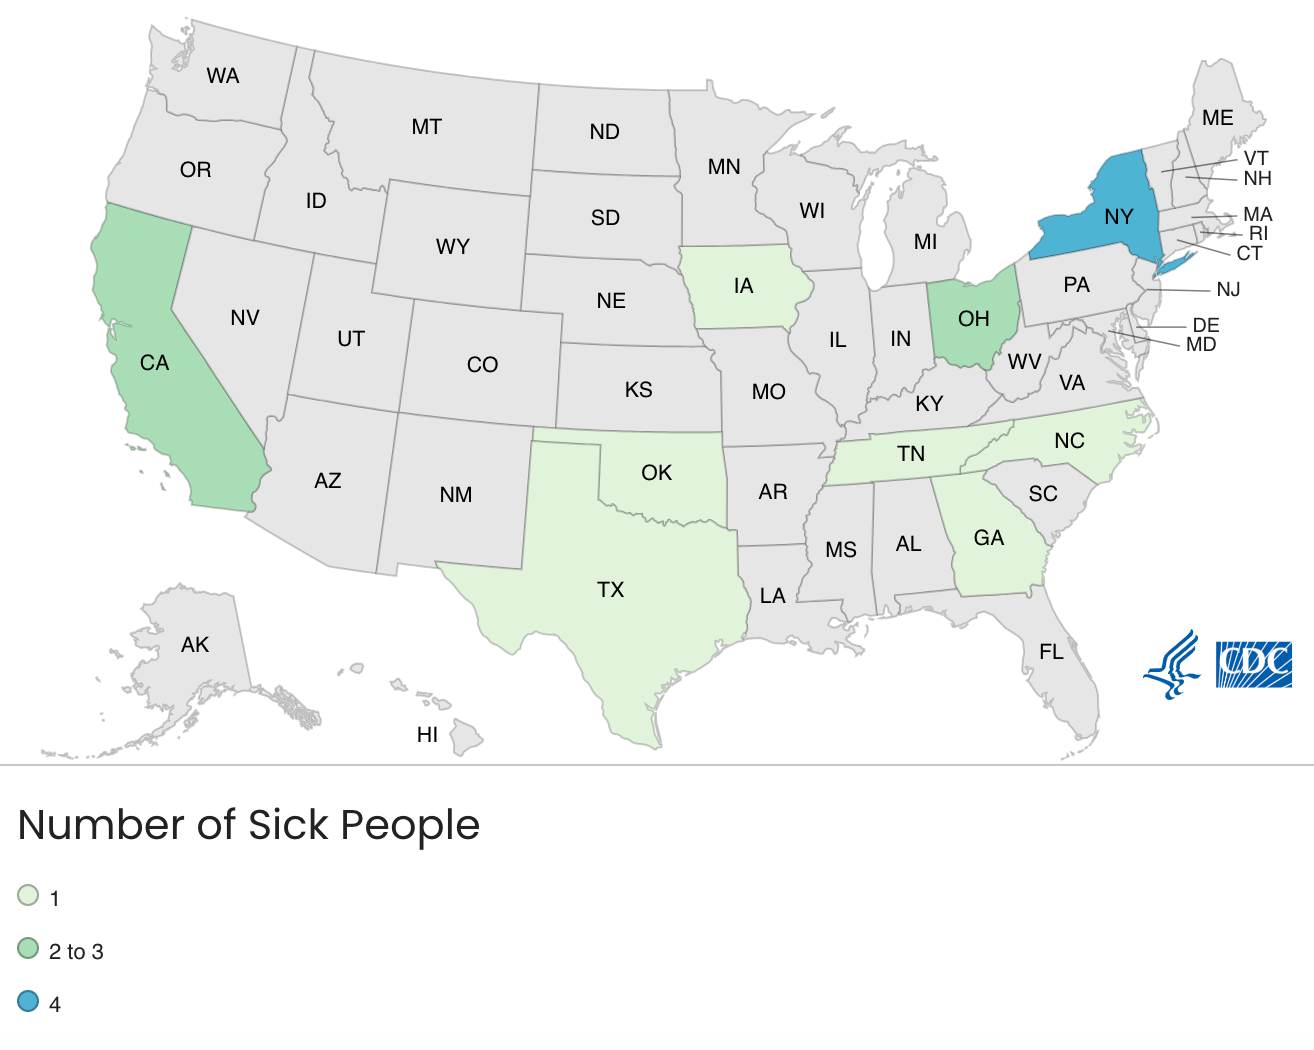 Where the Salmonella-infected individuals live.